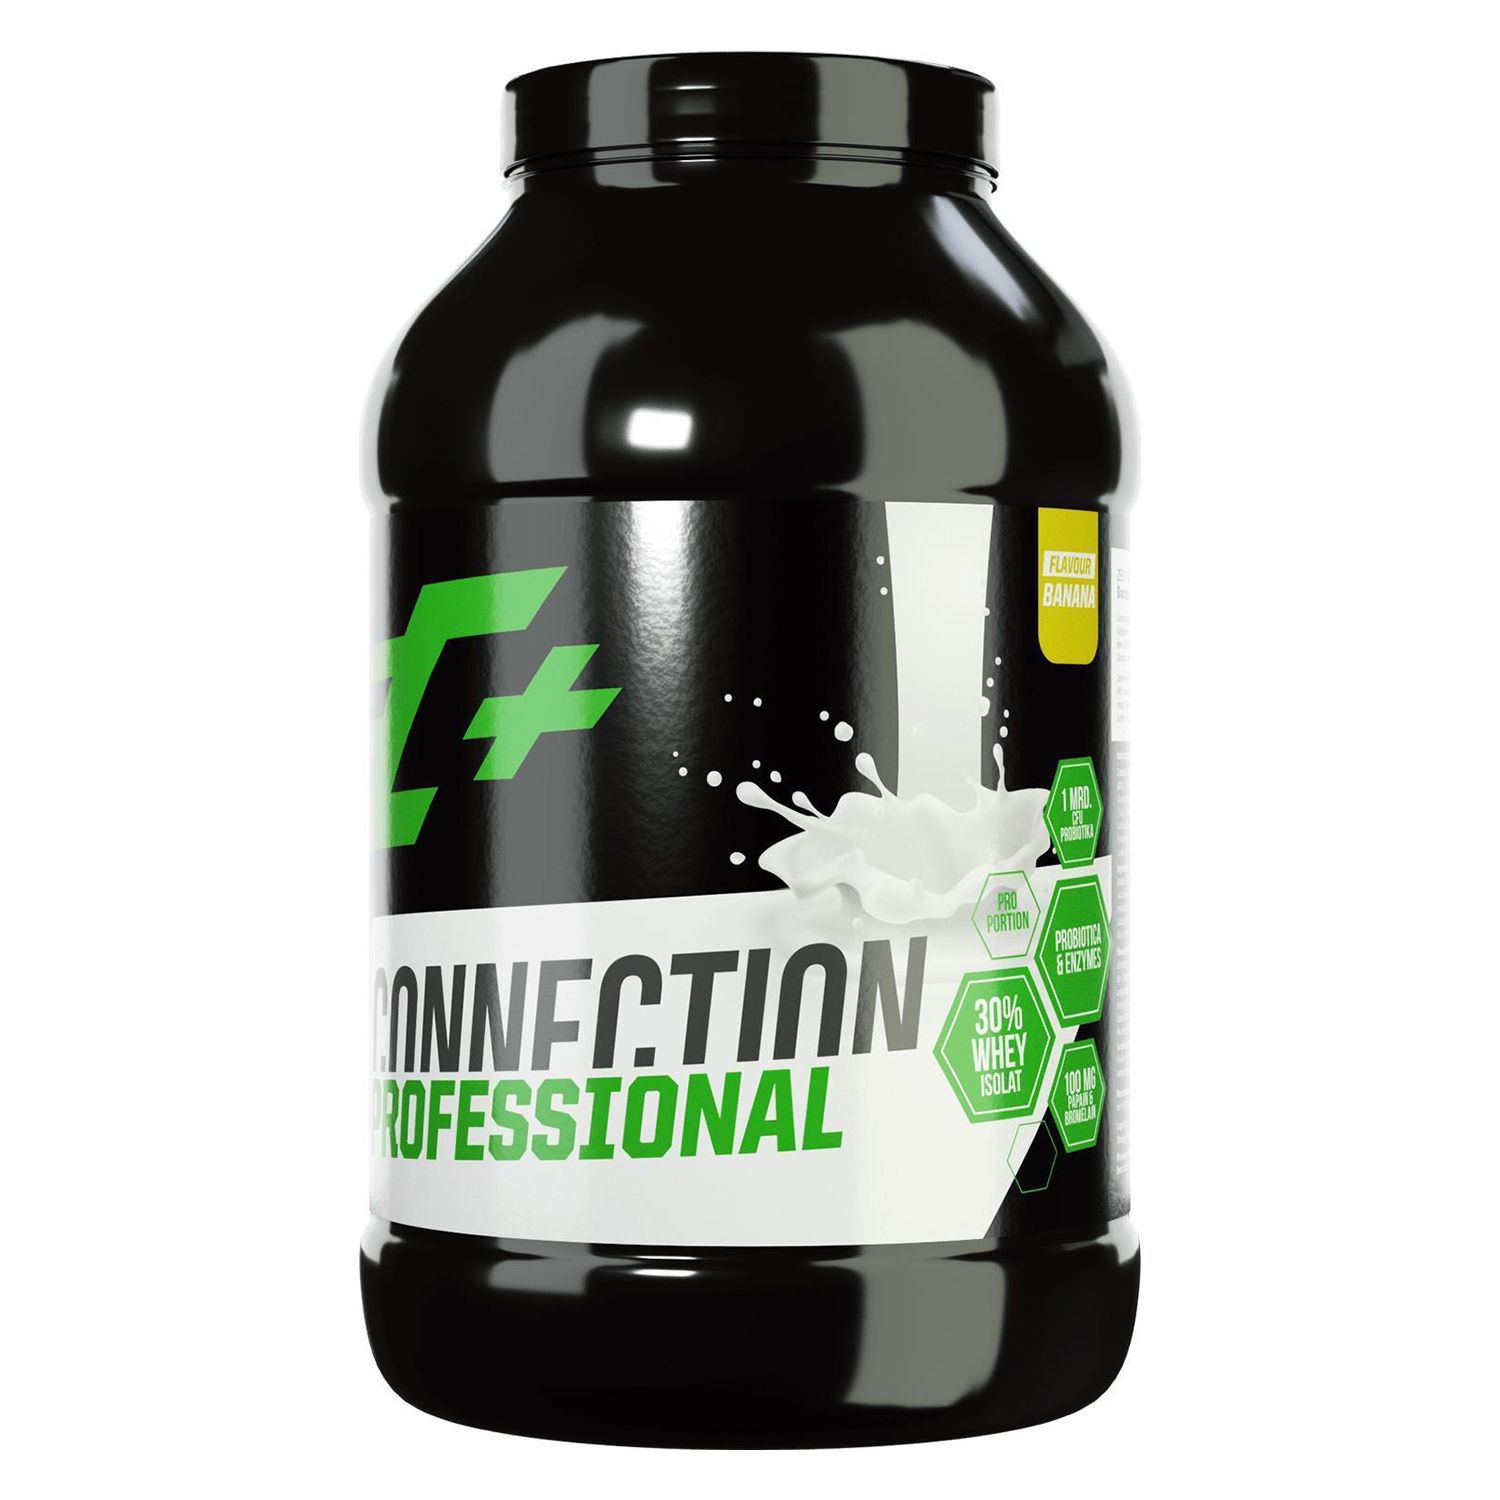 Zec+ Whey Connection Professional Protein Banana